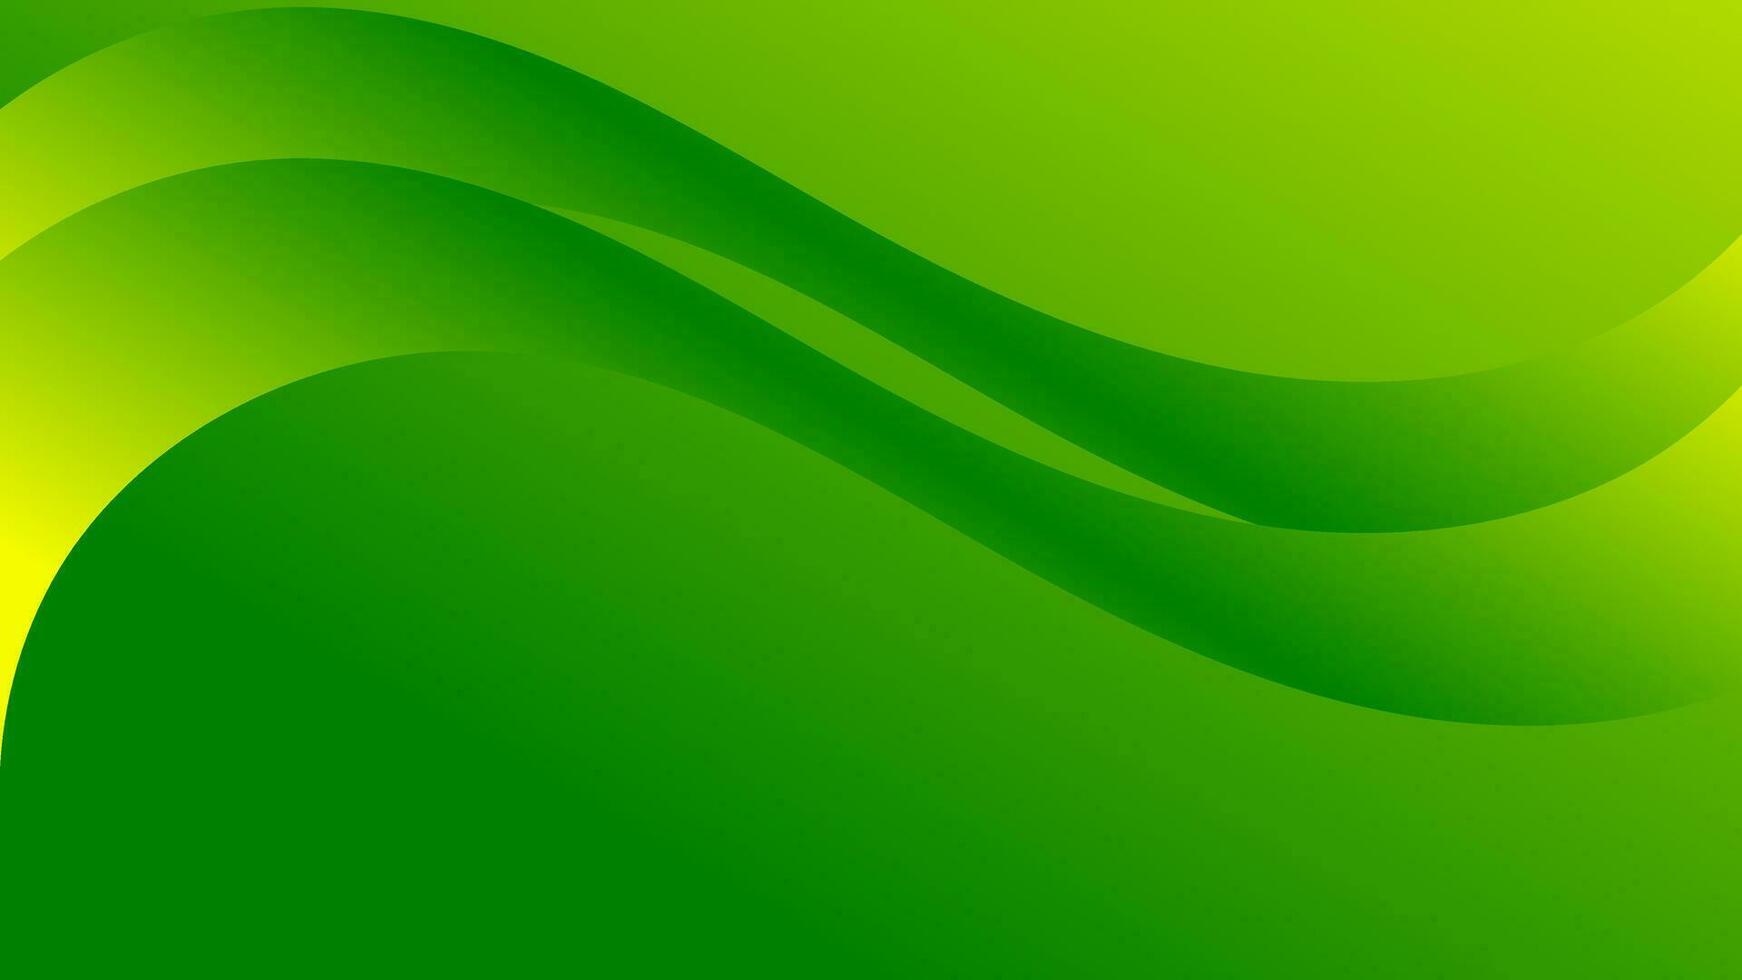 Simple wavy abstract background with yellow green gradations vector